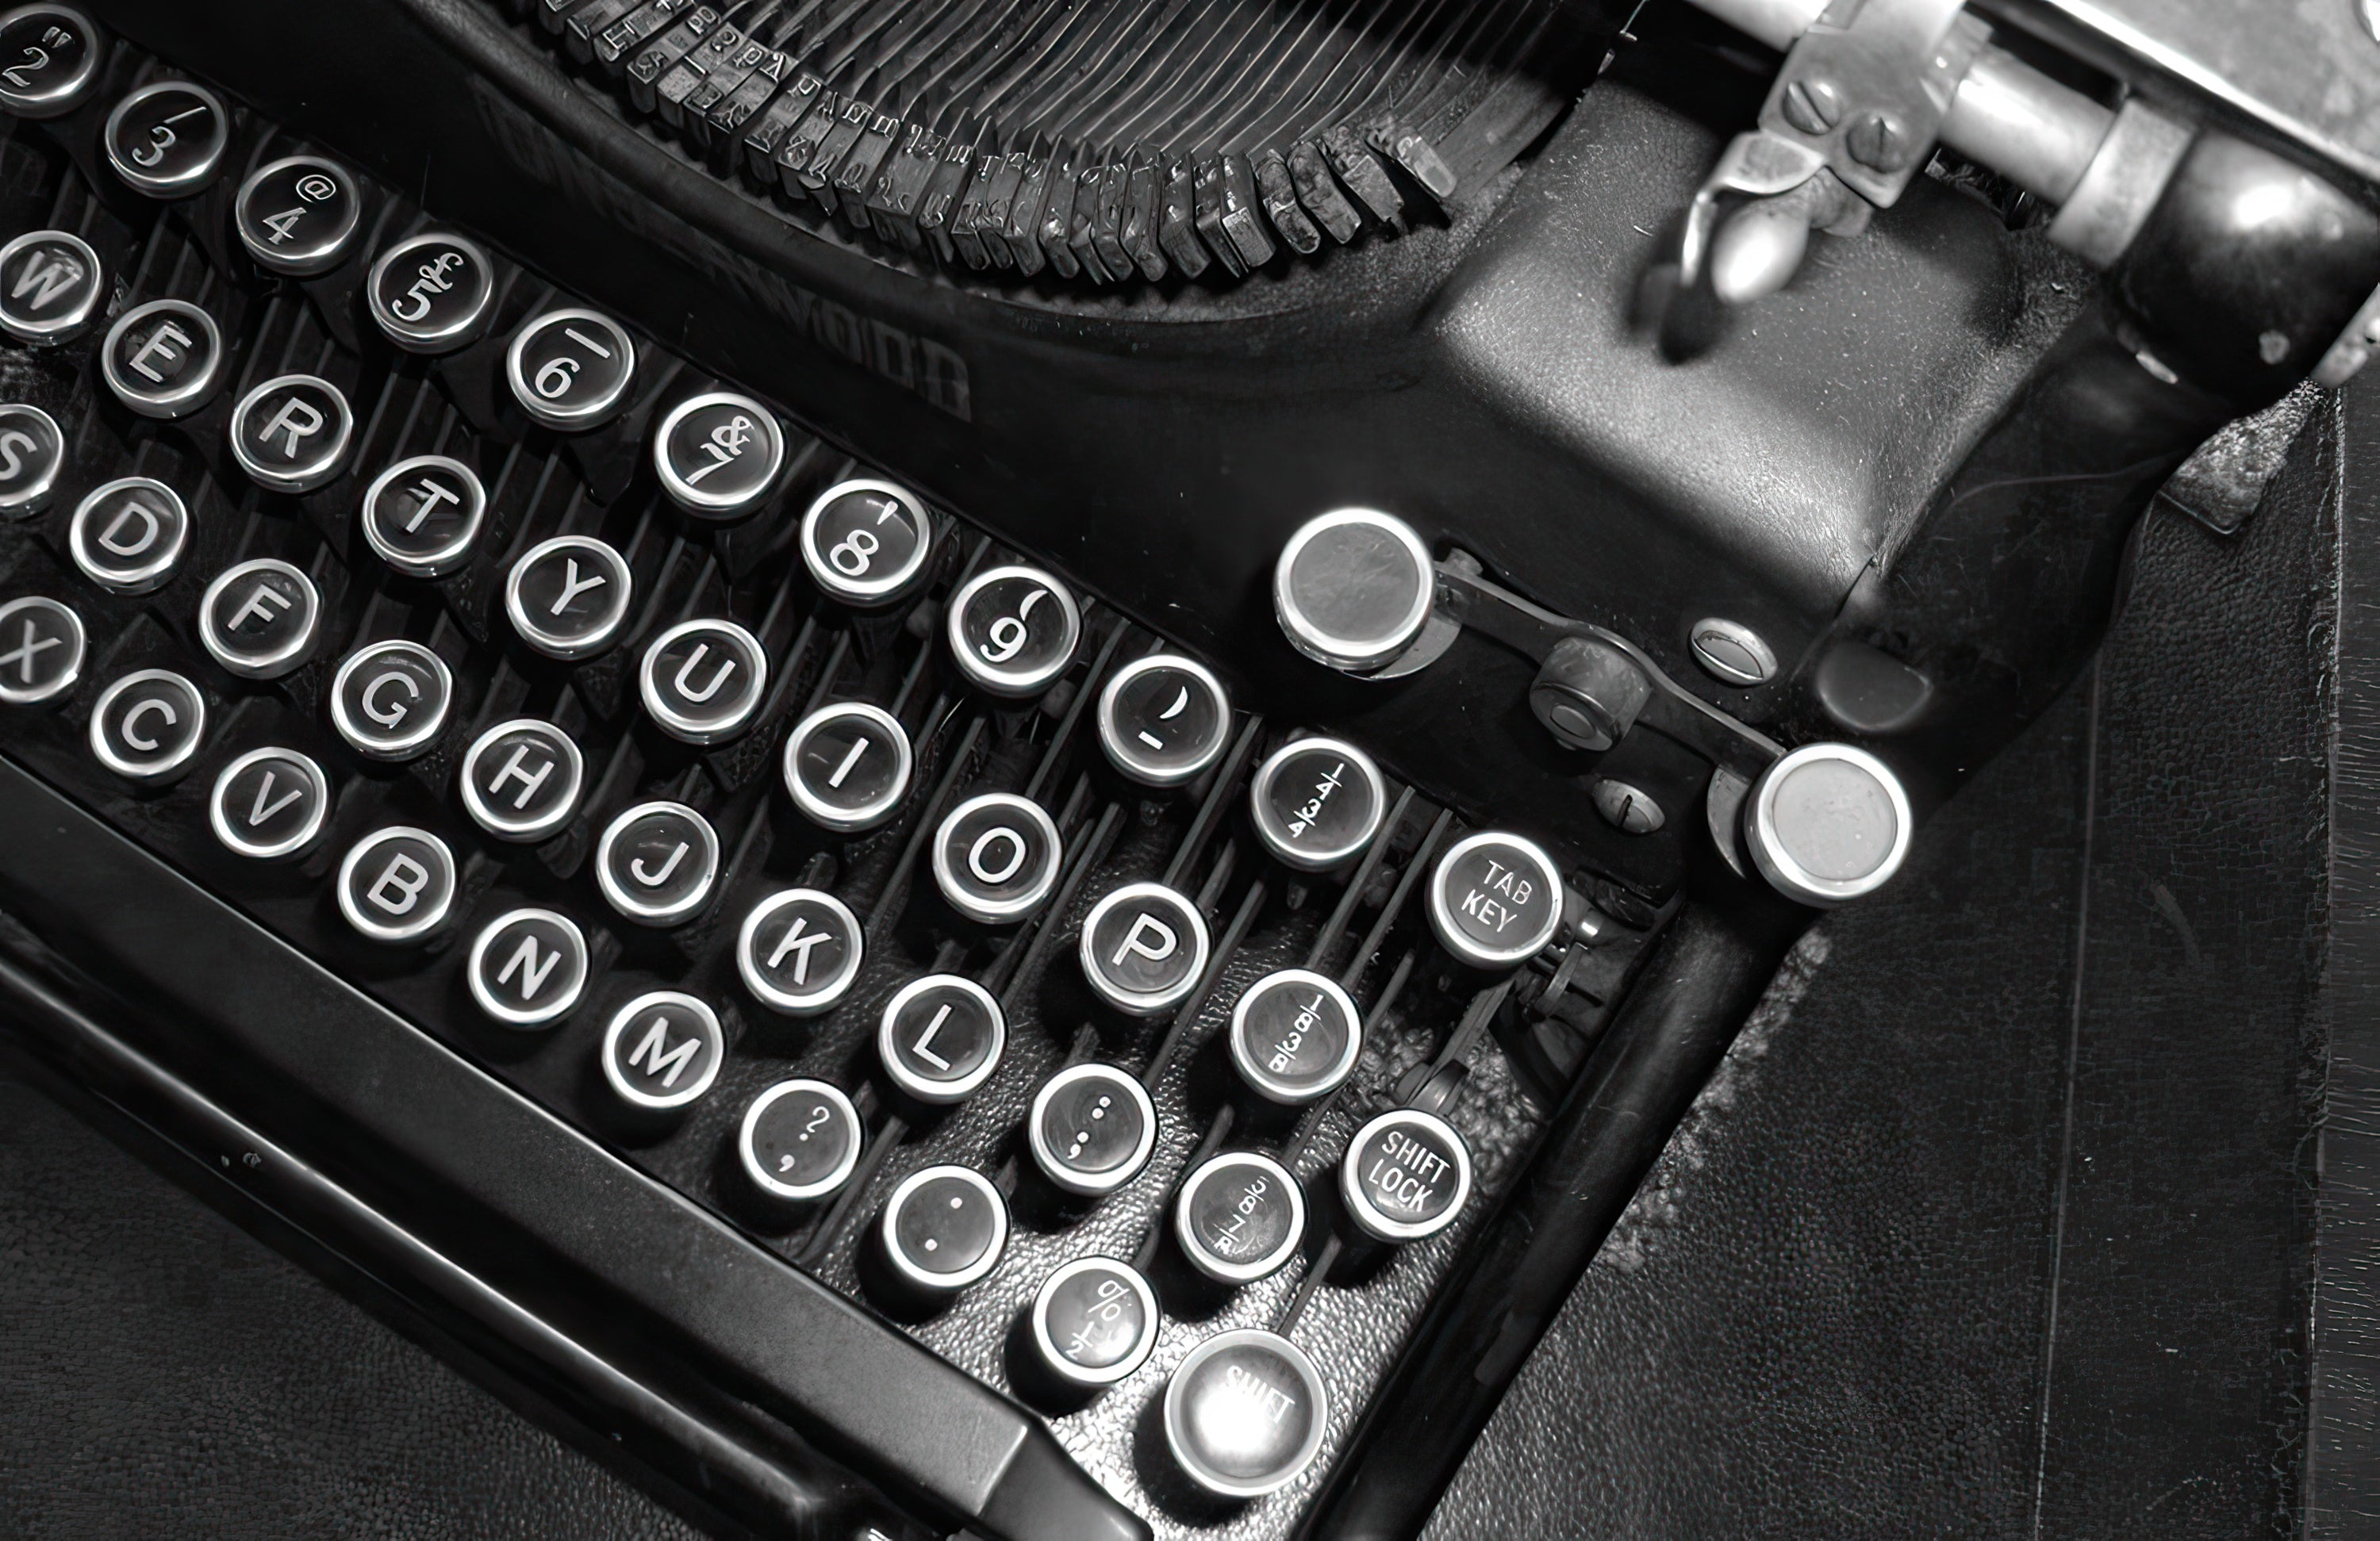 2016 Adapted Screenplay Competition - Image of Vintage Typewriter